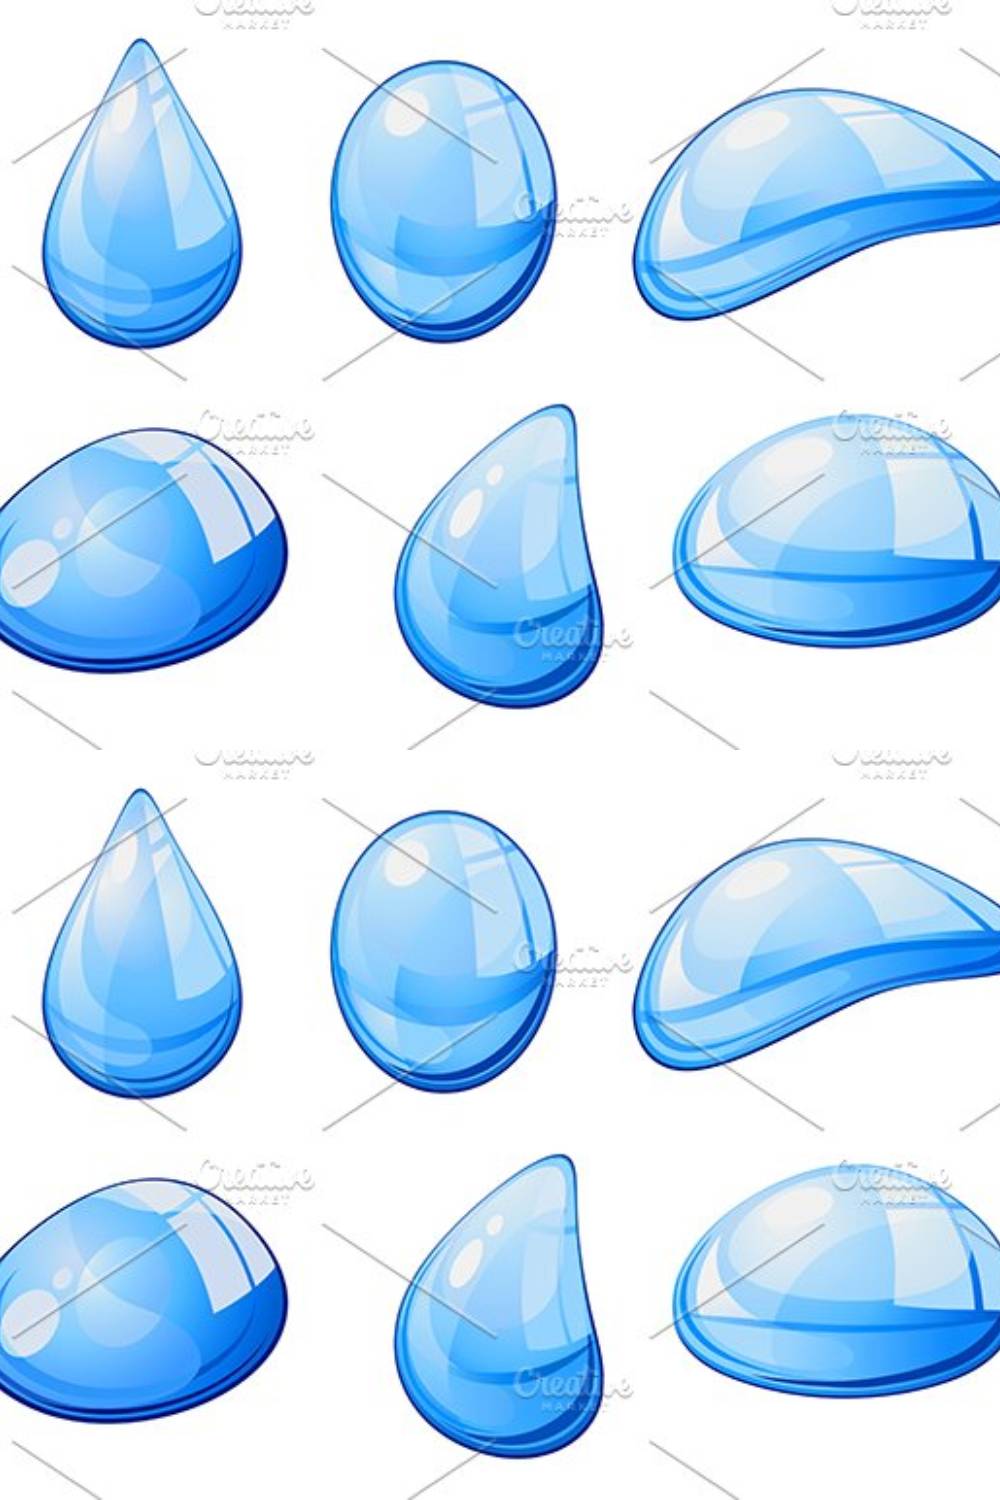 Clean Water Drops Pinterest Cover.